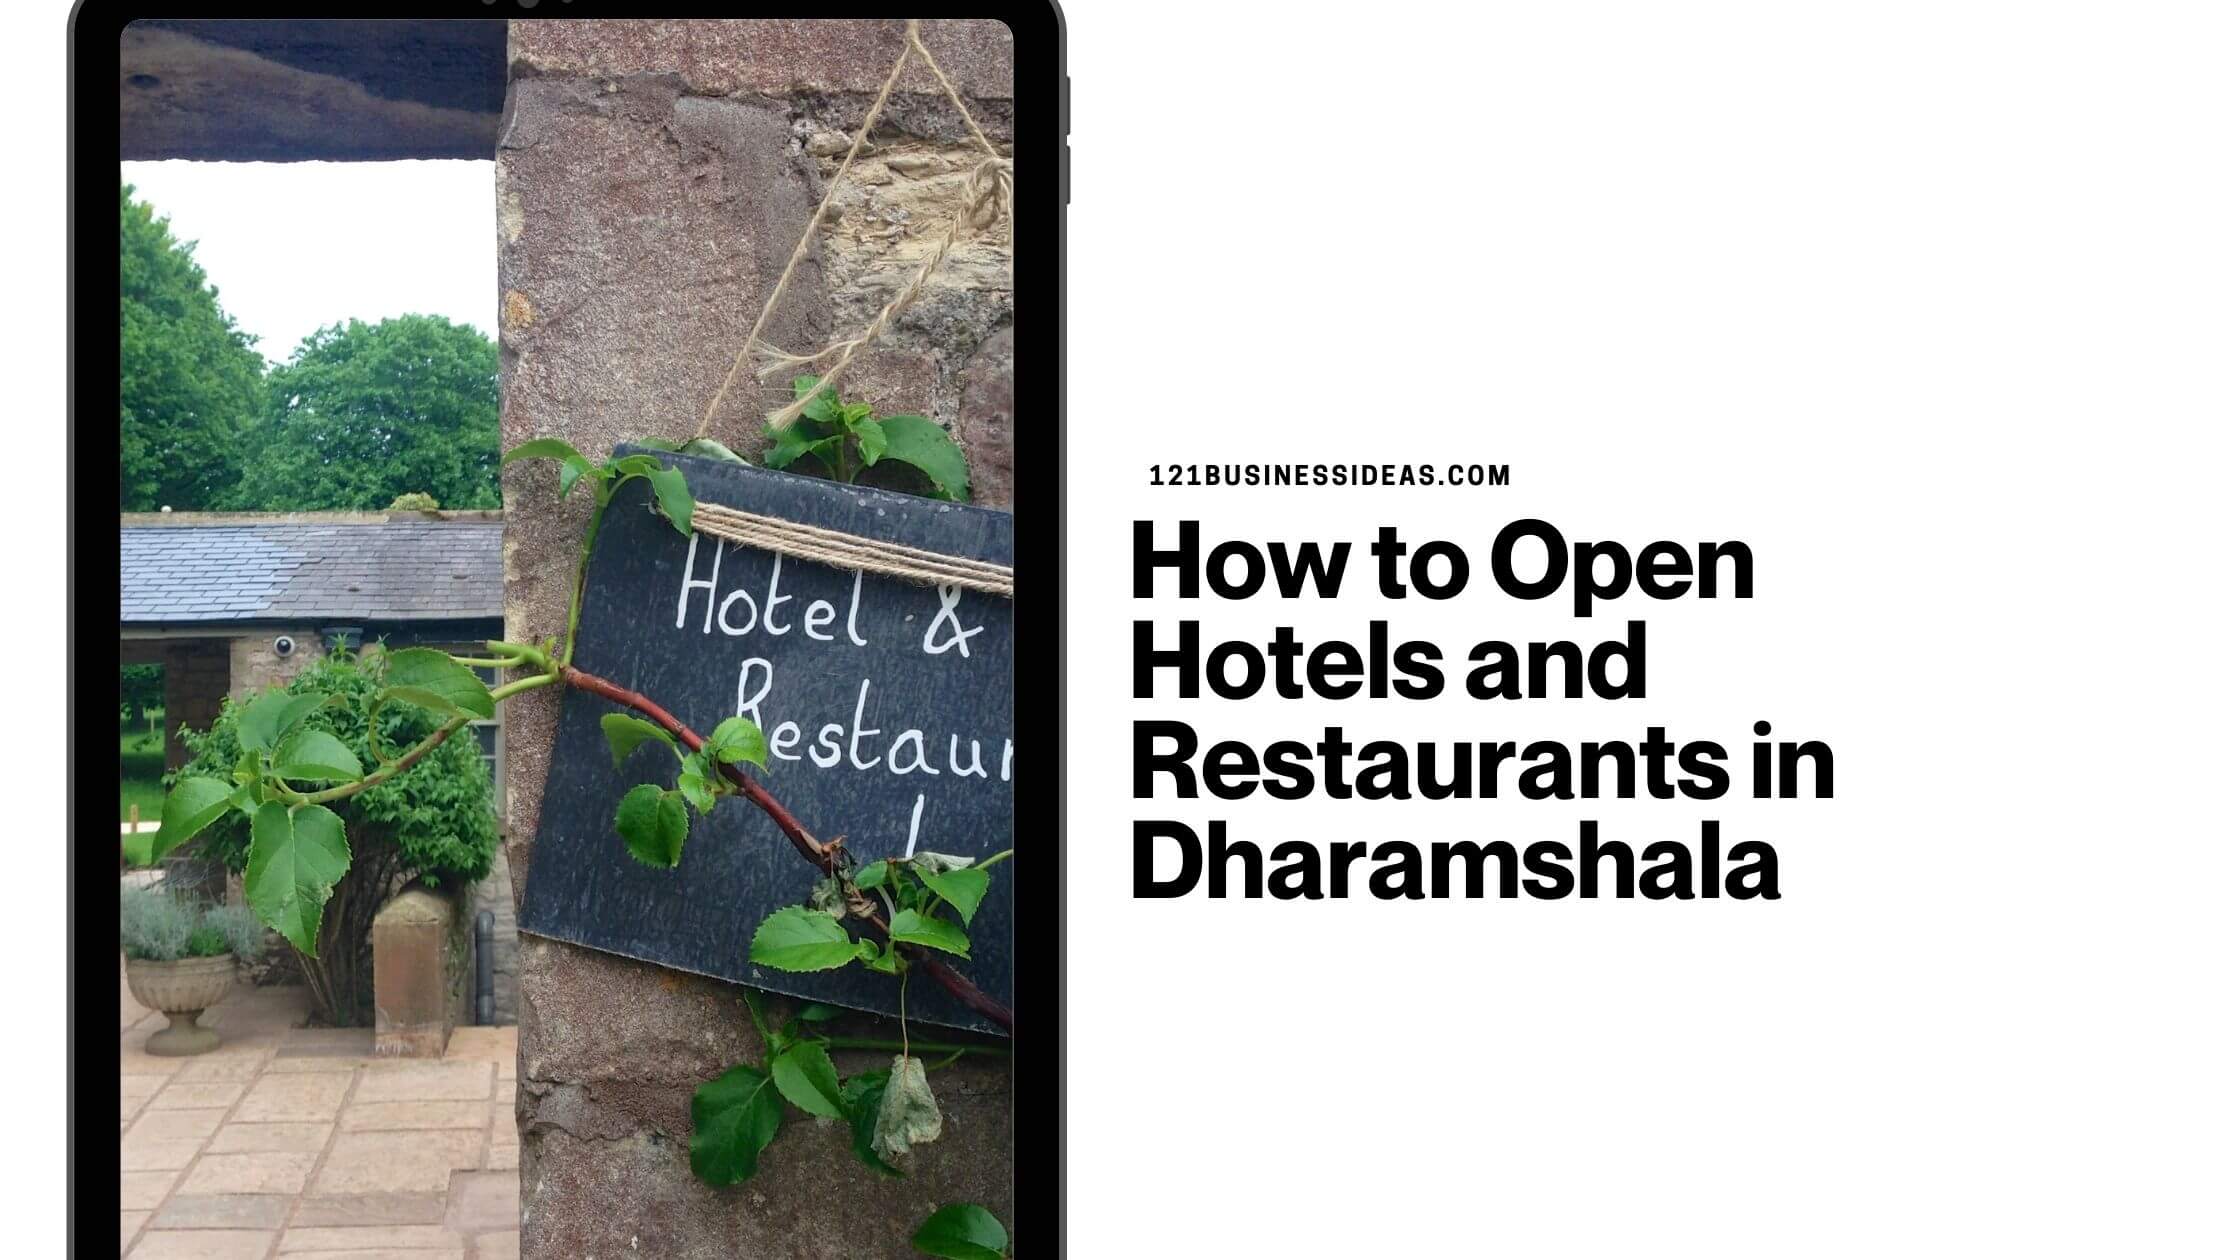 How to Open Hotels and Restaurants in Dharamshala (1)